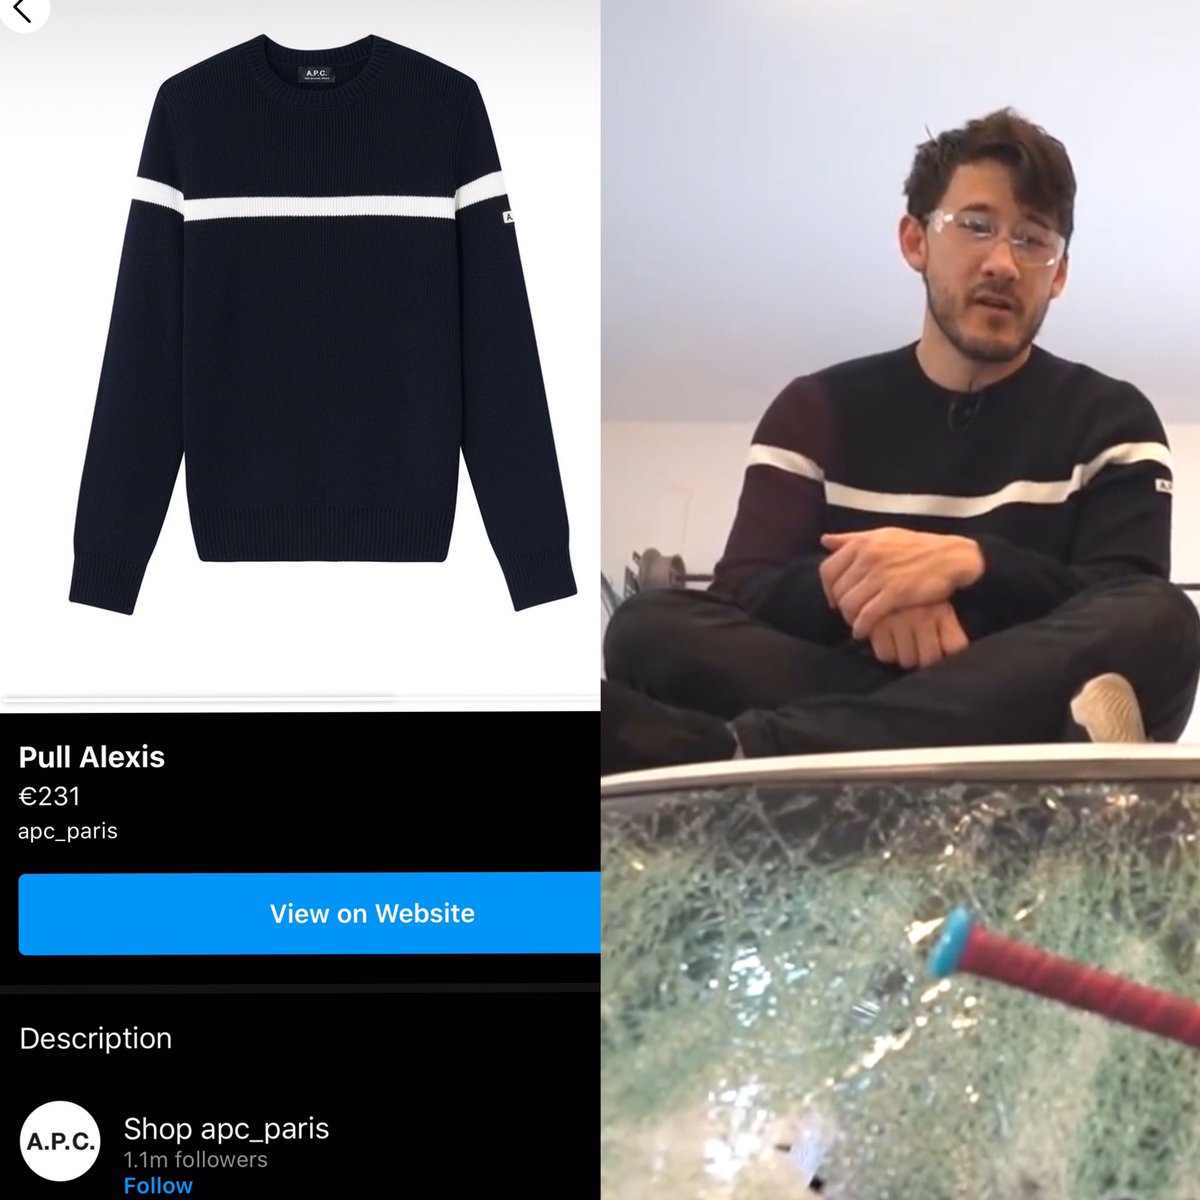 Found this pretty knitted sweater! This is the “Alexis” sweater by A.P.C. This one is unfortunately sold out and not on the website anymore (only on instagram) BUT i’ve found a site where it’s still available and for like half of the original price:  https://www.slamjam.com/en_US/man/clothing/knitwear/crewneck-sweaters/a.p.c./alexis-sweater/J148793.html